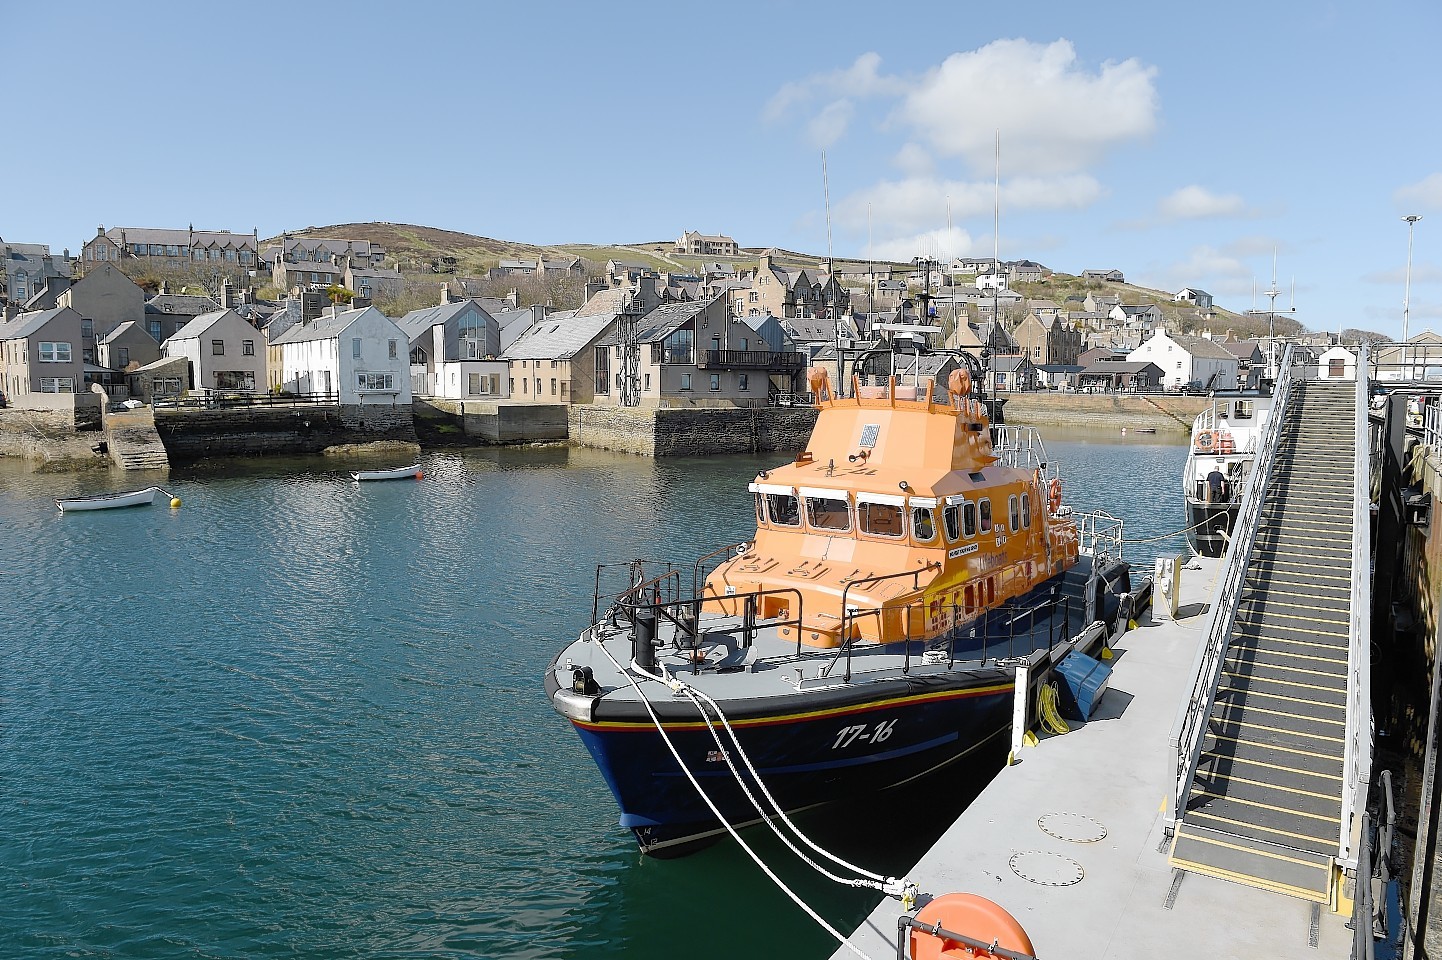 Stromness lifeboat